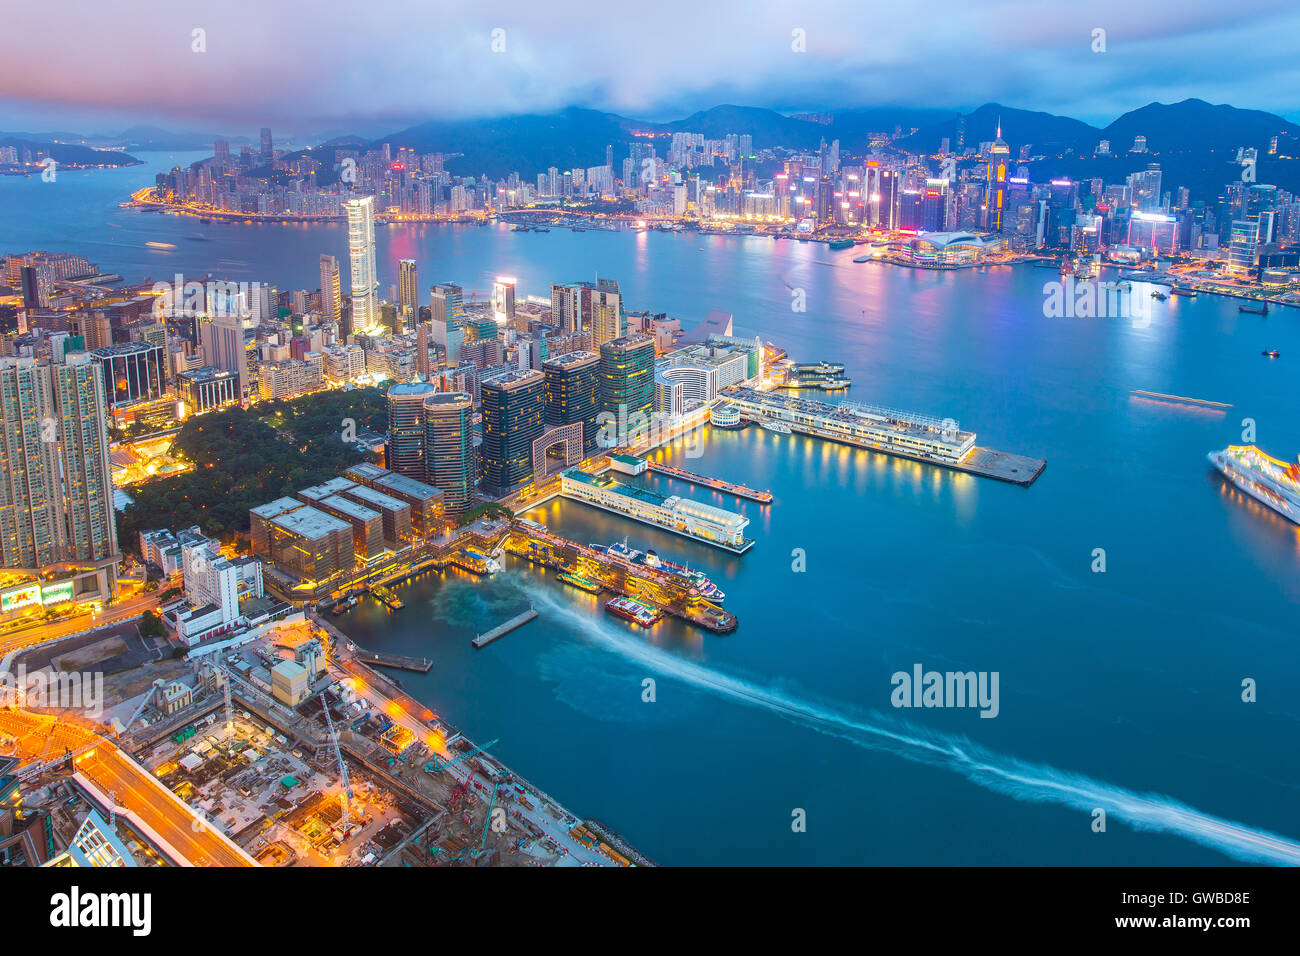 Night at the Victoria Harbor in Hong Kong city skyline. Stock Photo